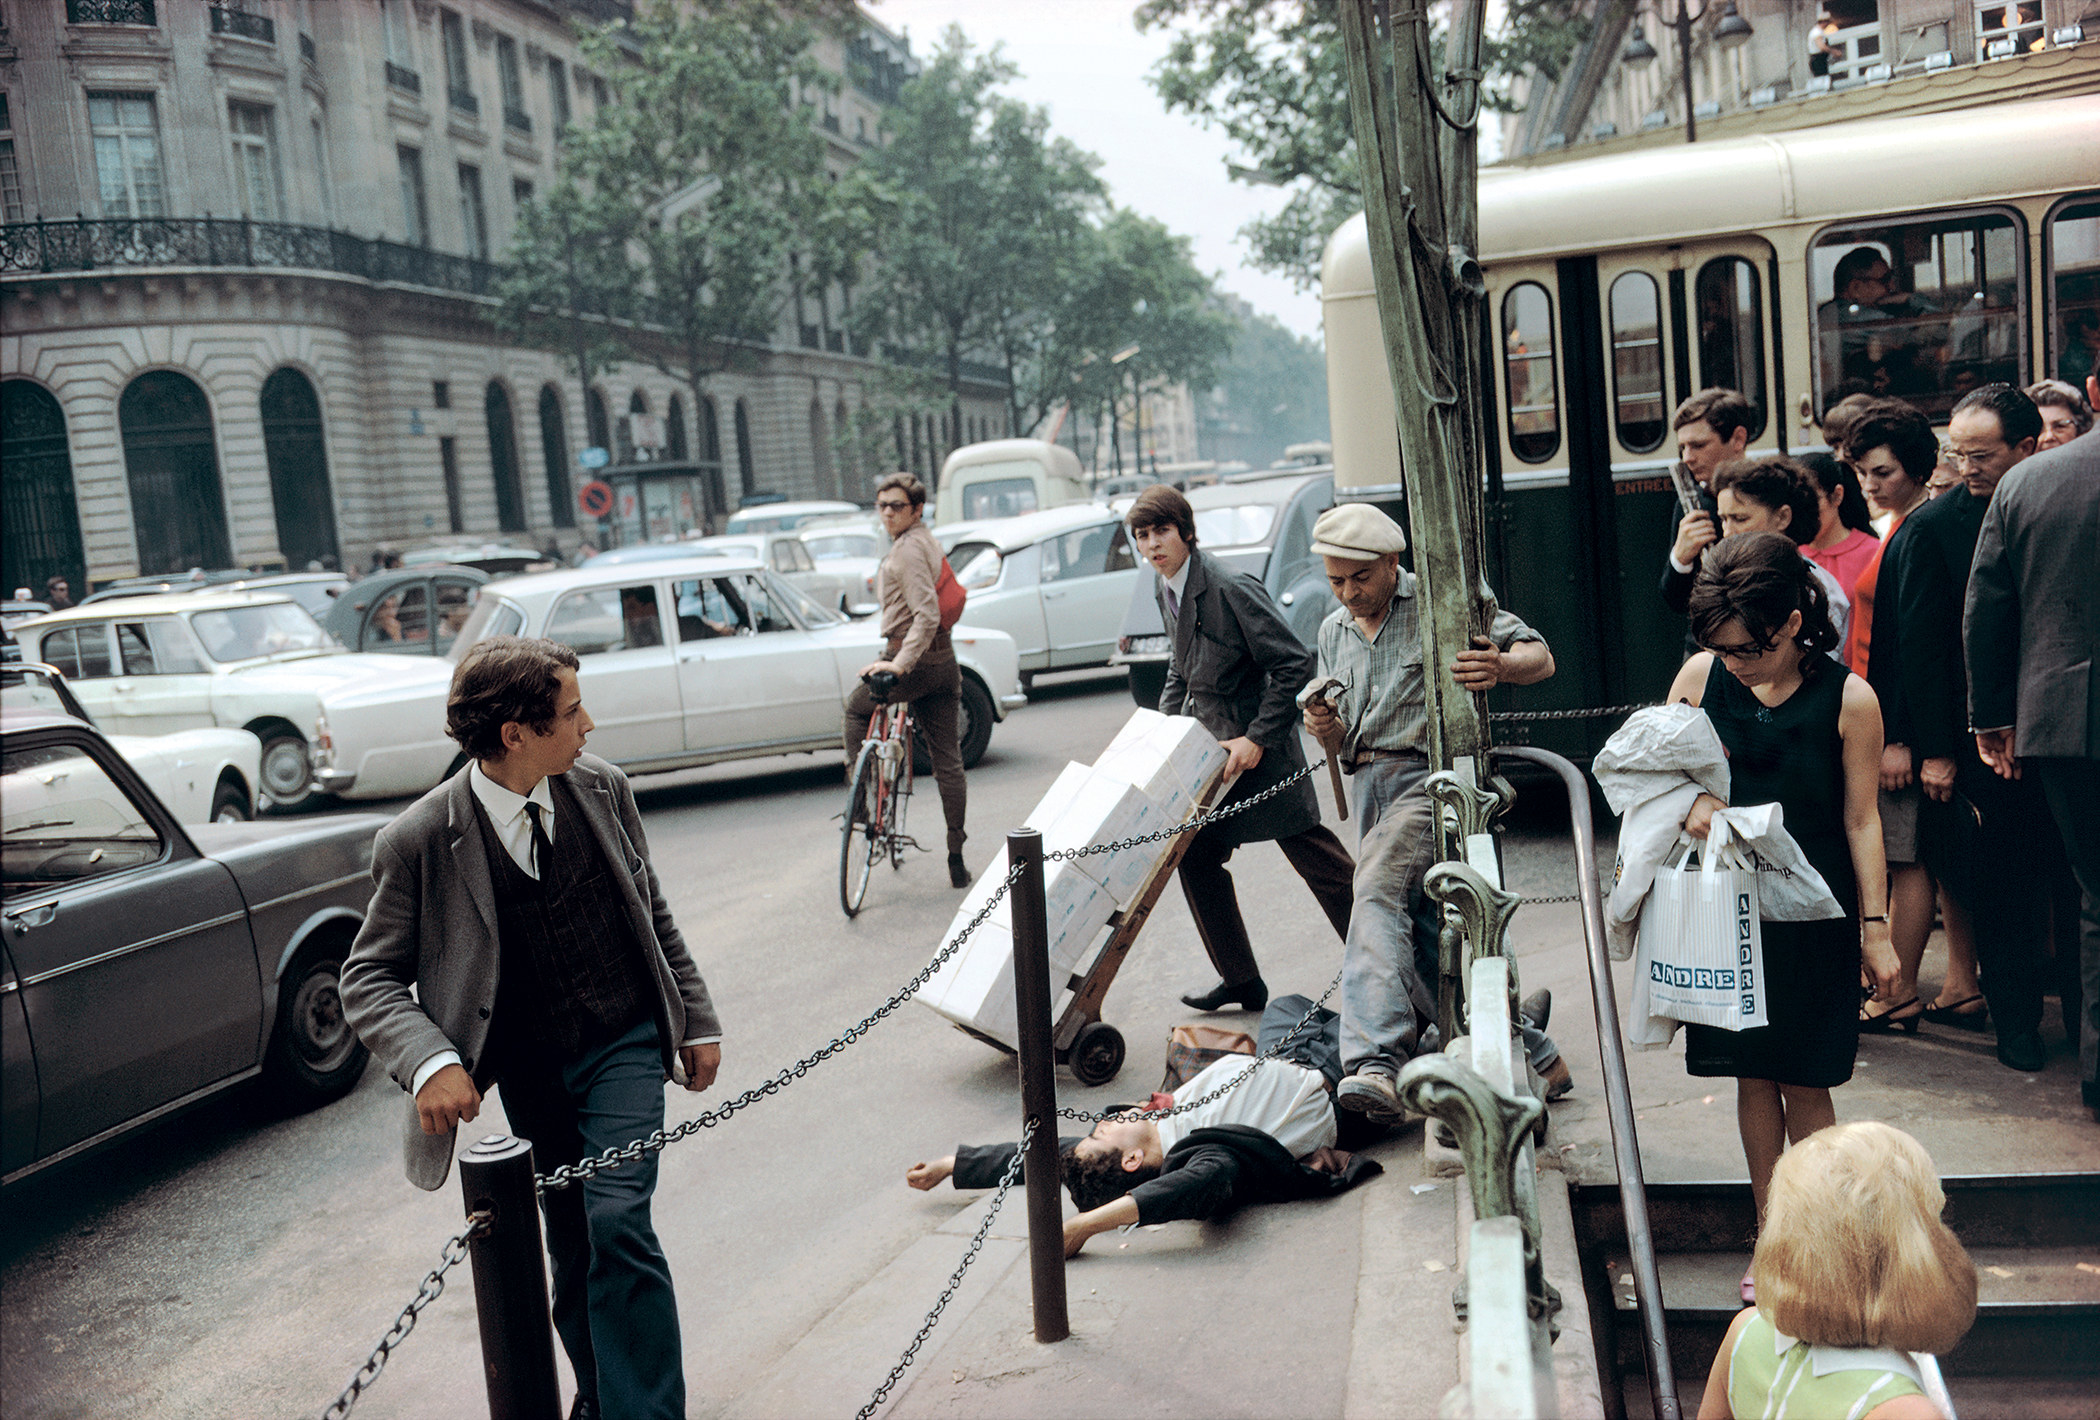 A man lies on the ground in the middle of a crowded city street while a cyclist and pedestrians look at him